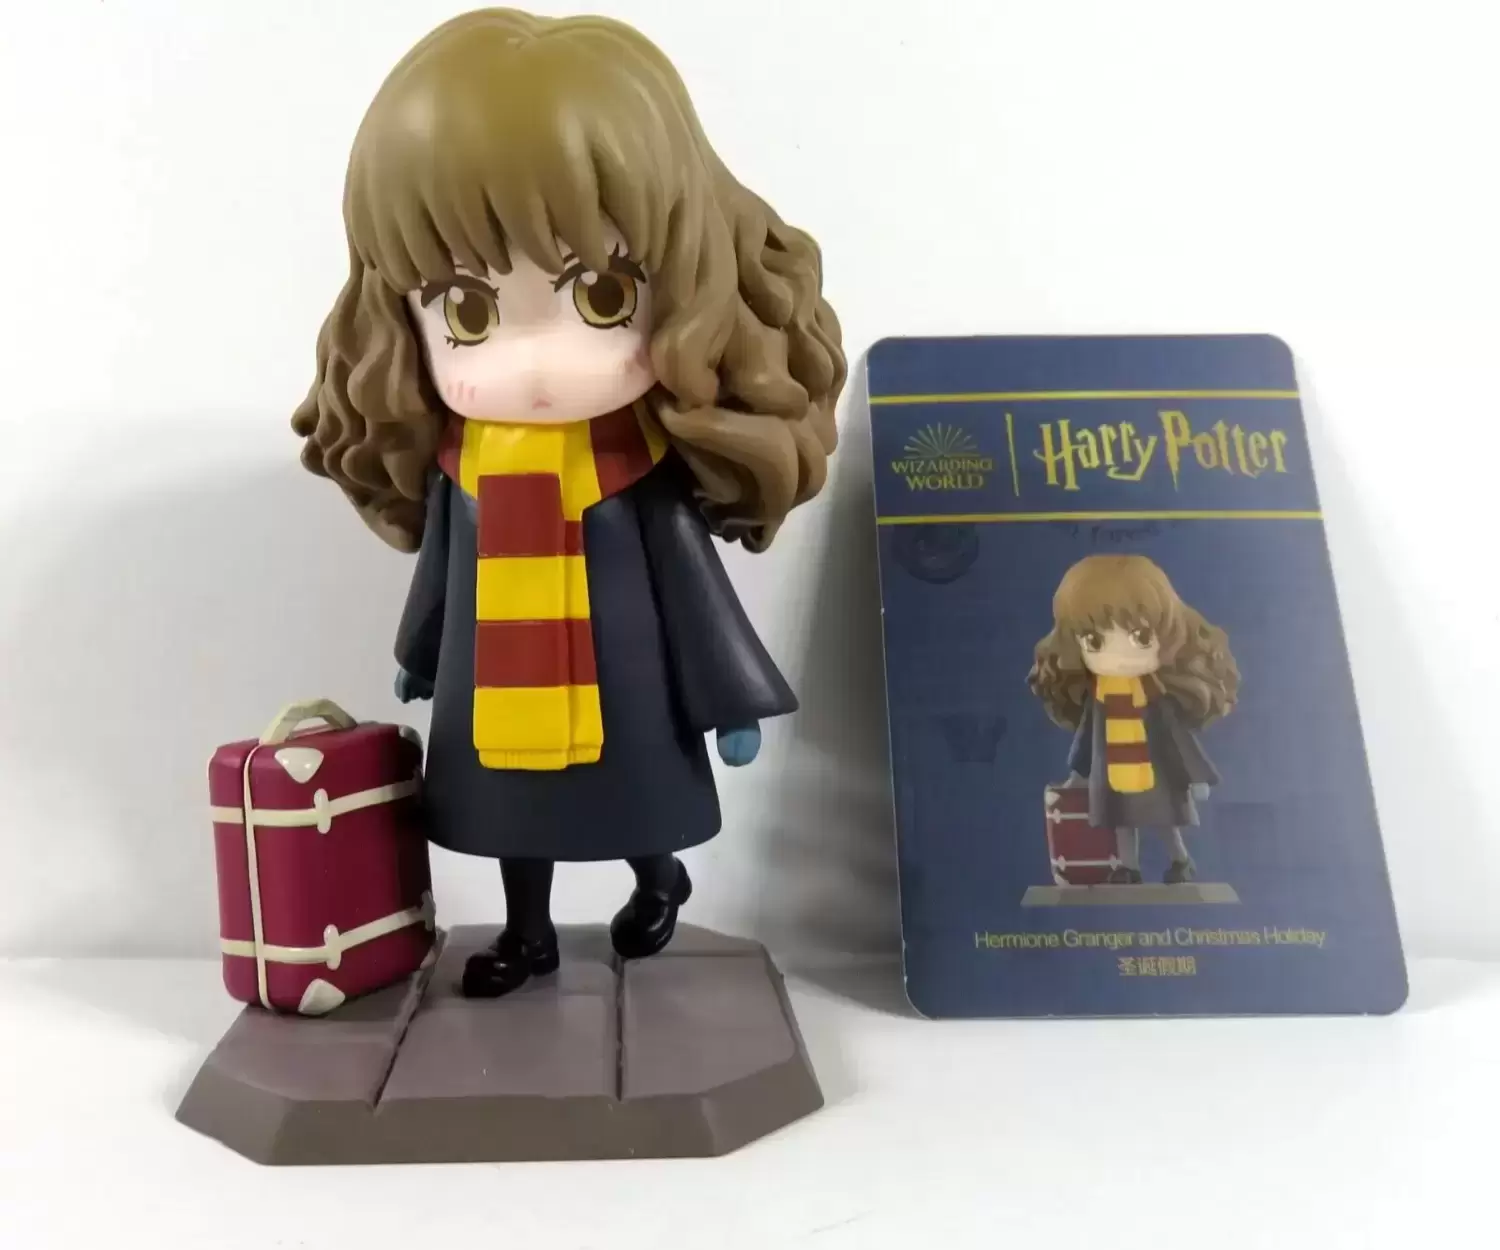 Harry Potter and The Sorcerer\'s Stone - Hermione Granger And Christmas Holiday